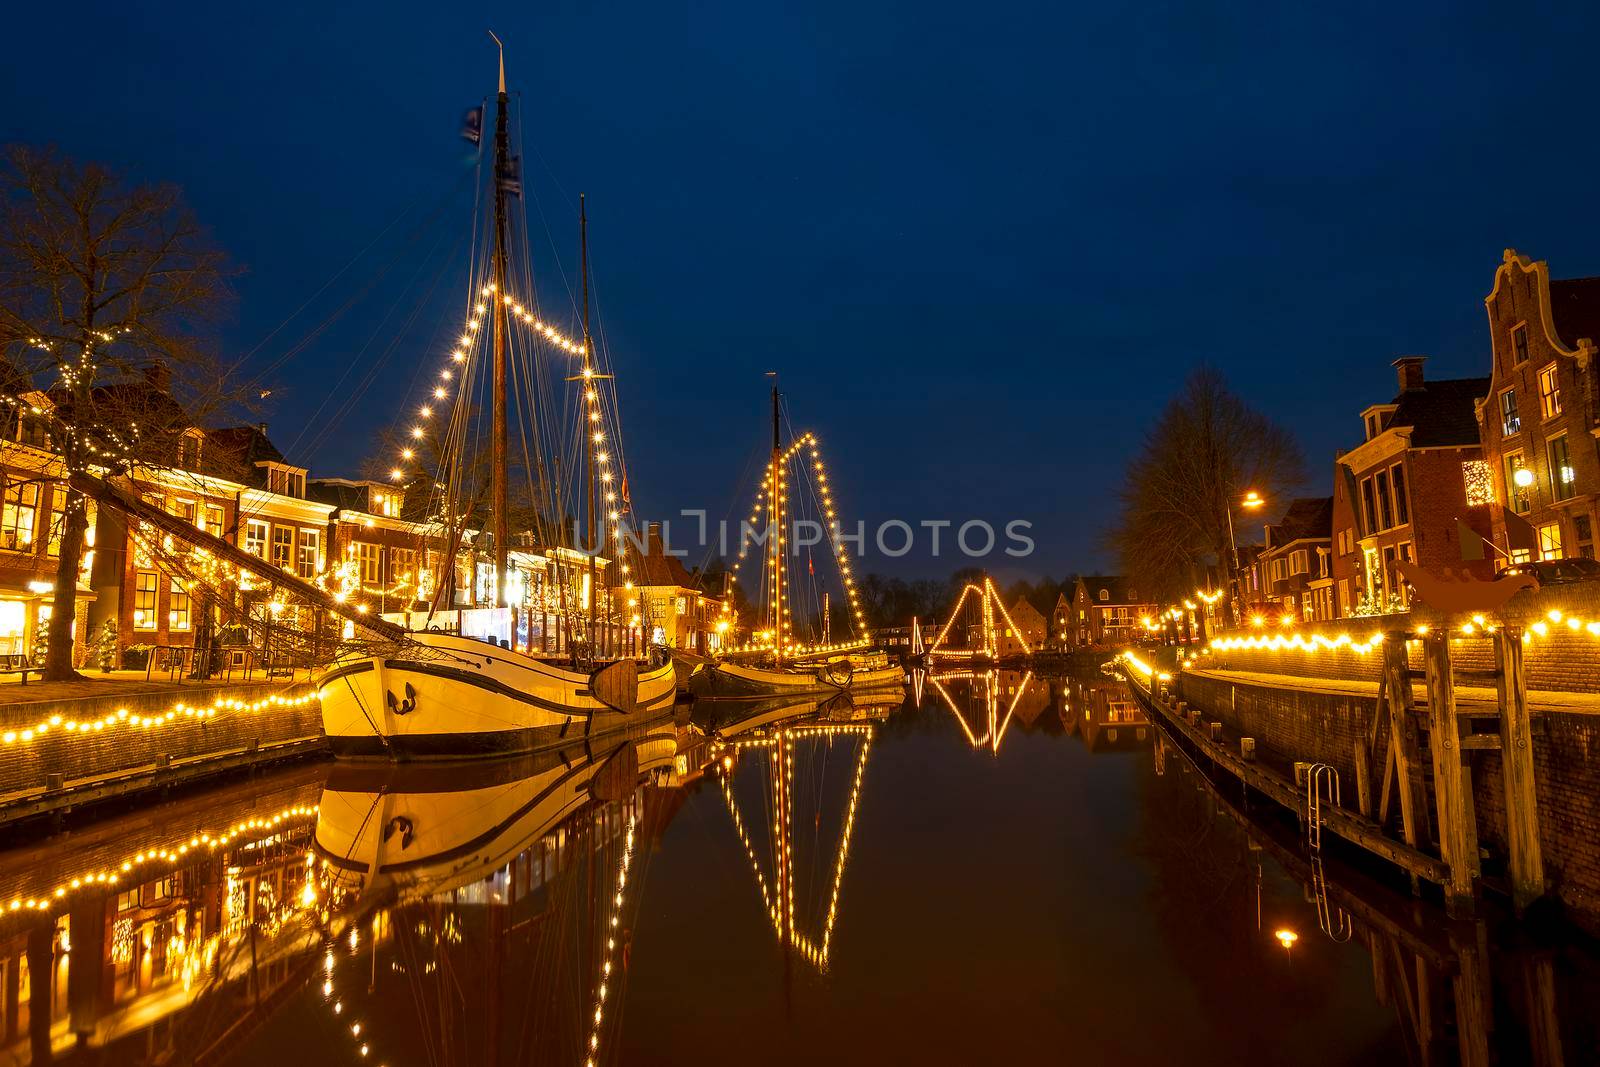 Decorated traditional boats in the harbor from Dokkum in the Netherlands at christmas at night by devy